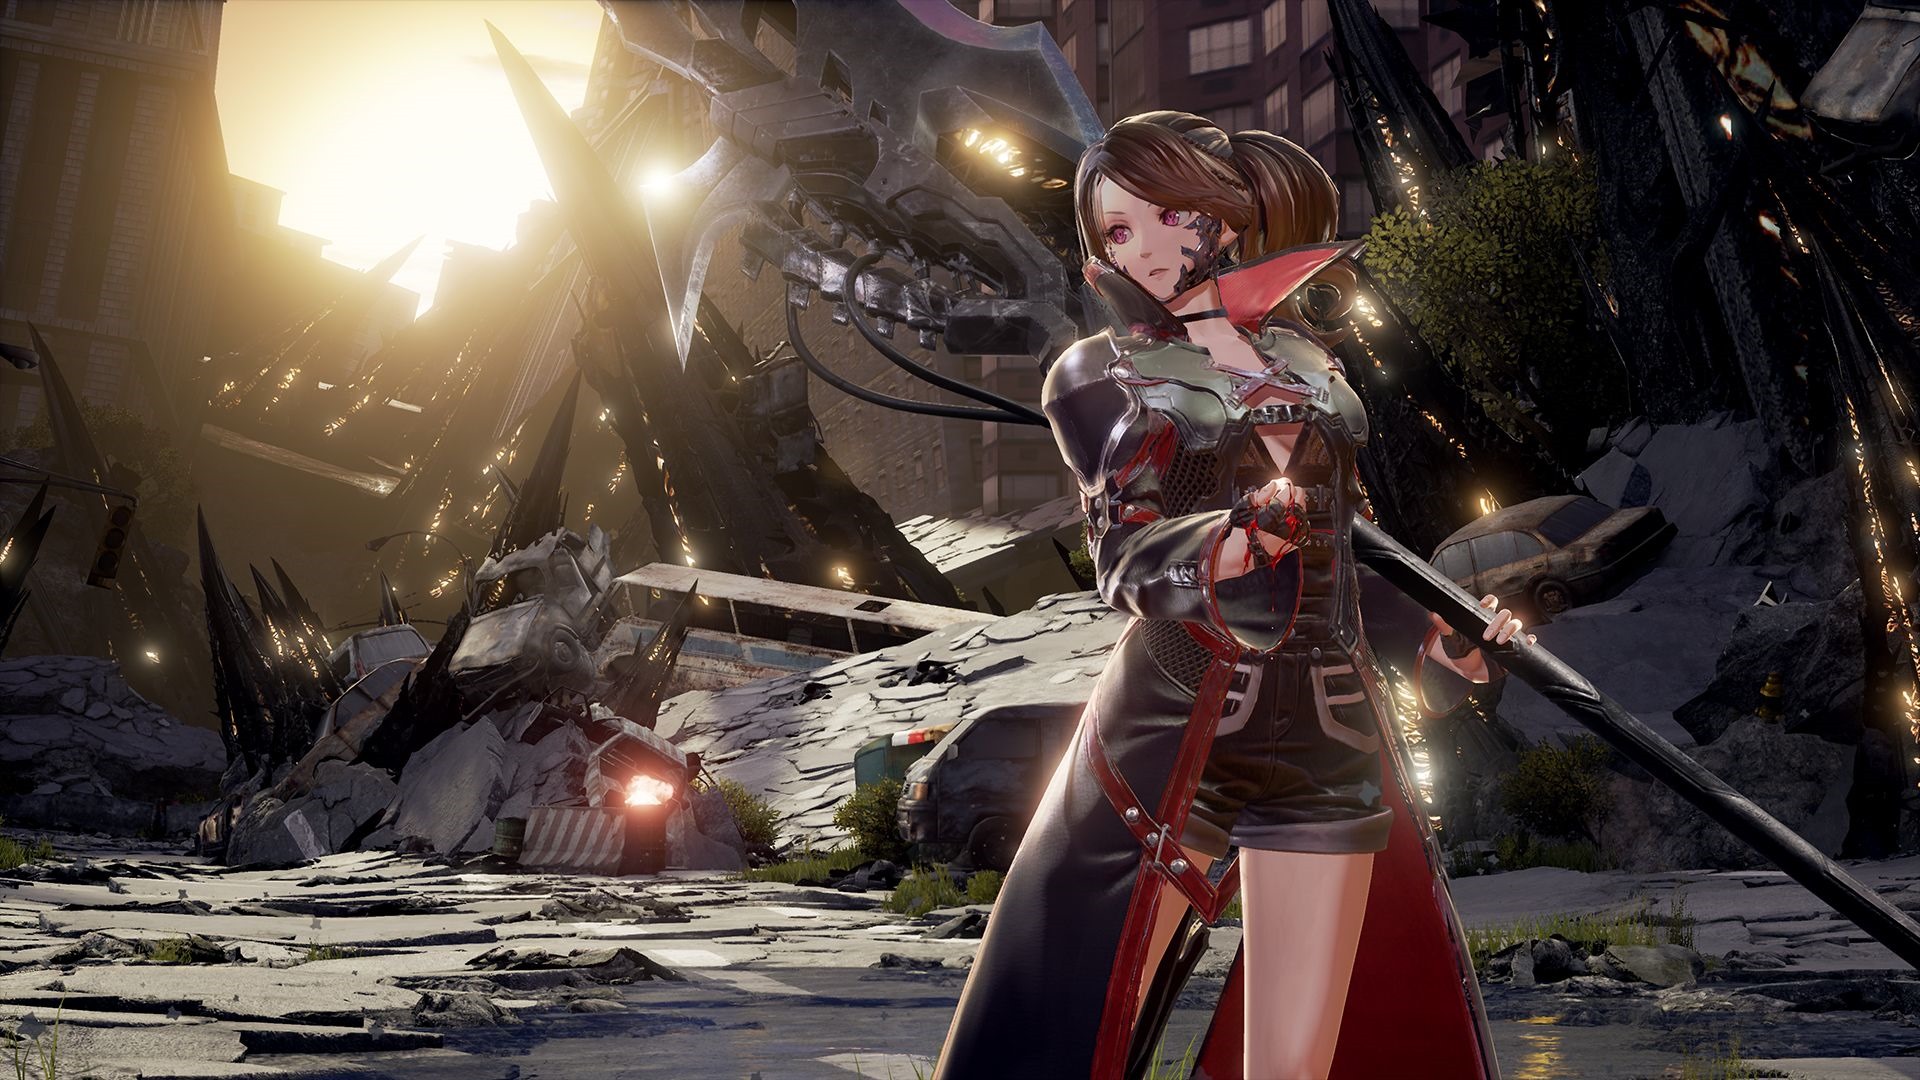 Code Vein Gets New Screenshots With Details On Its Battle System